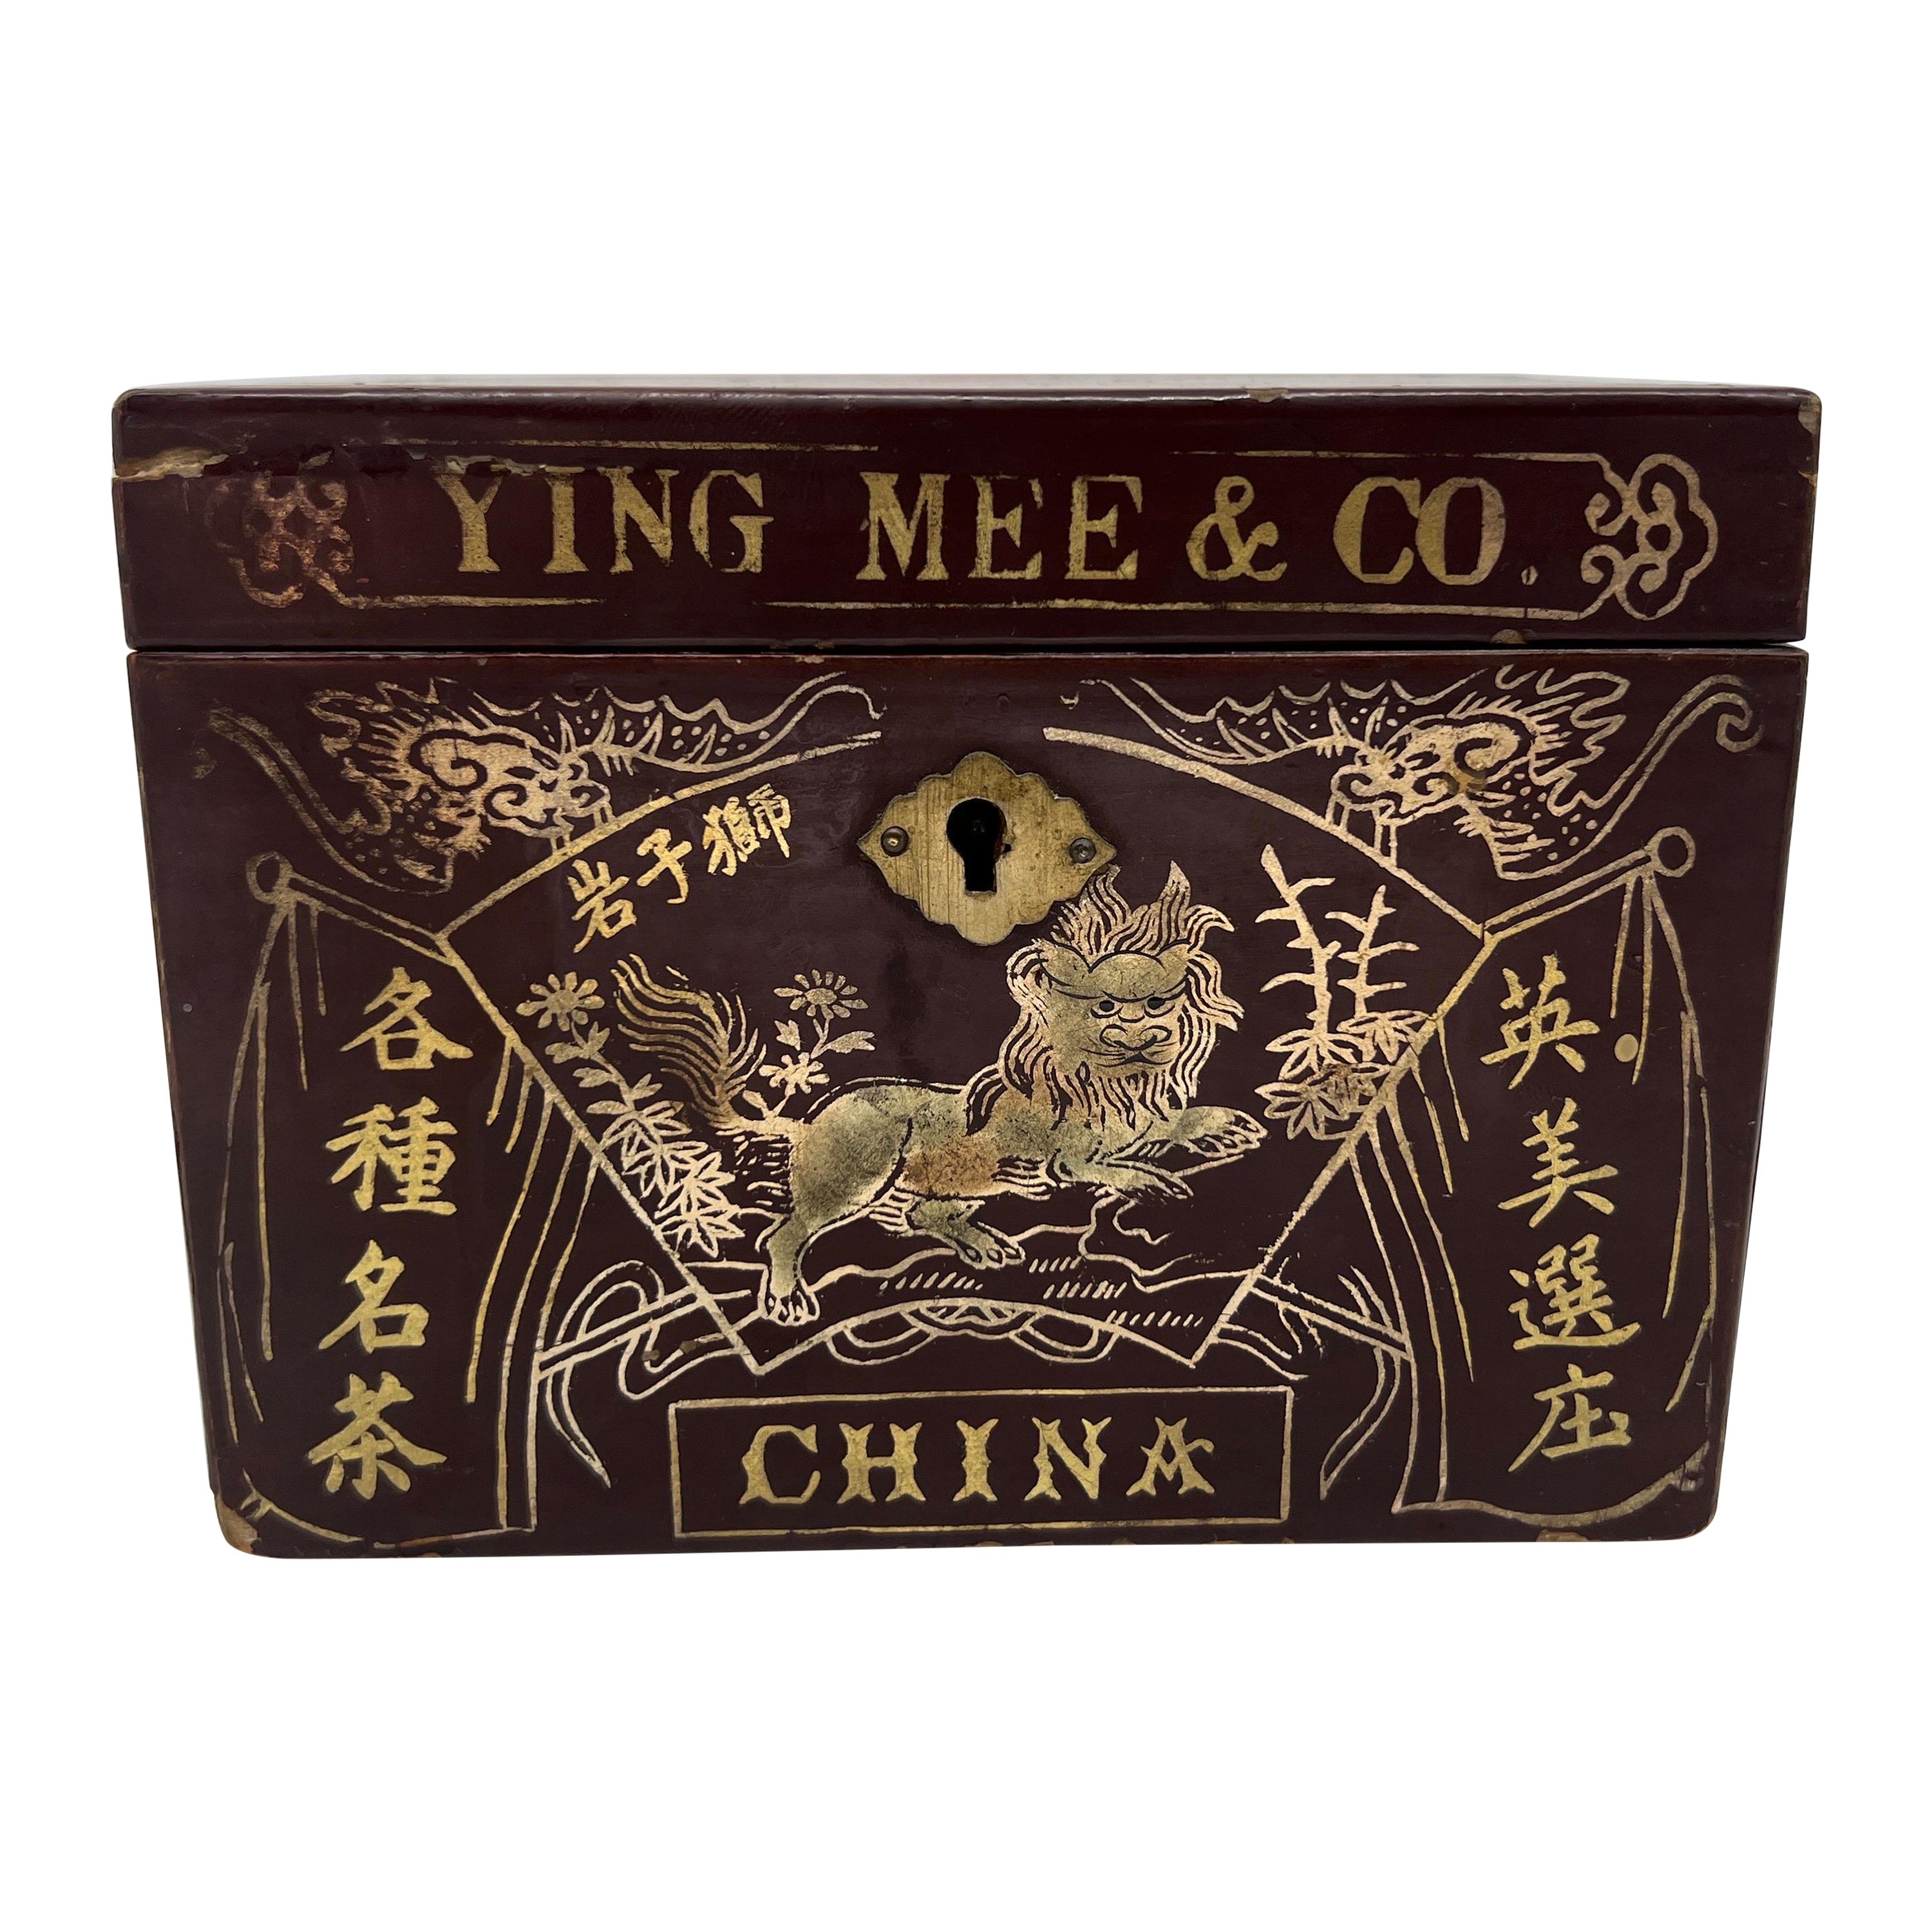 Ying Mee & Co., Antique Chinese Lacquer Tea Caddy or Box